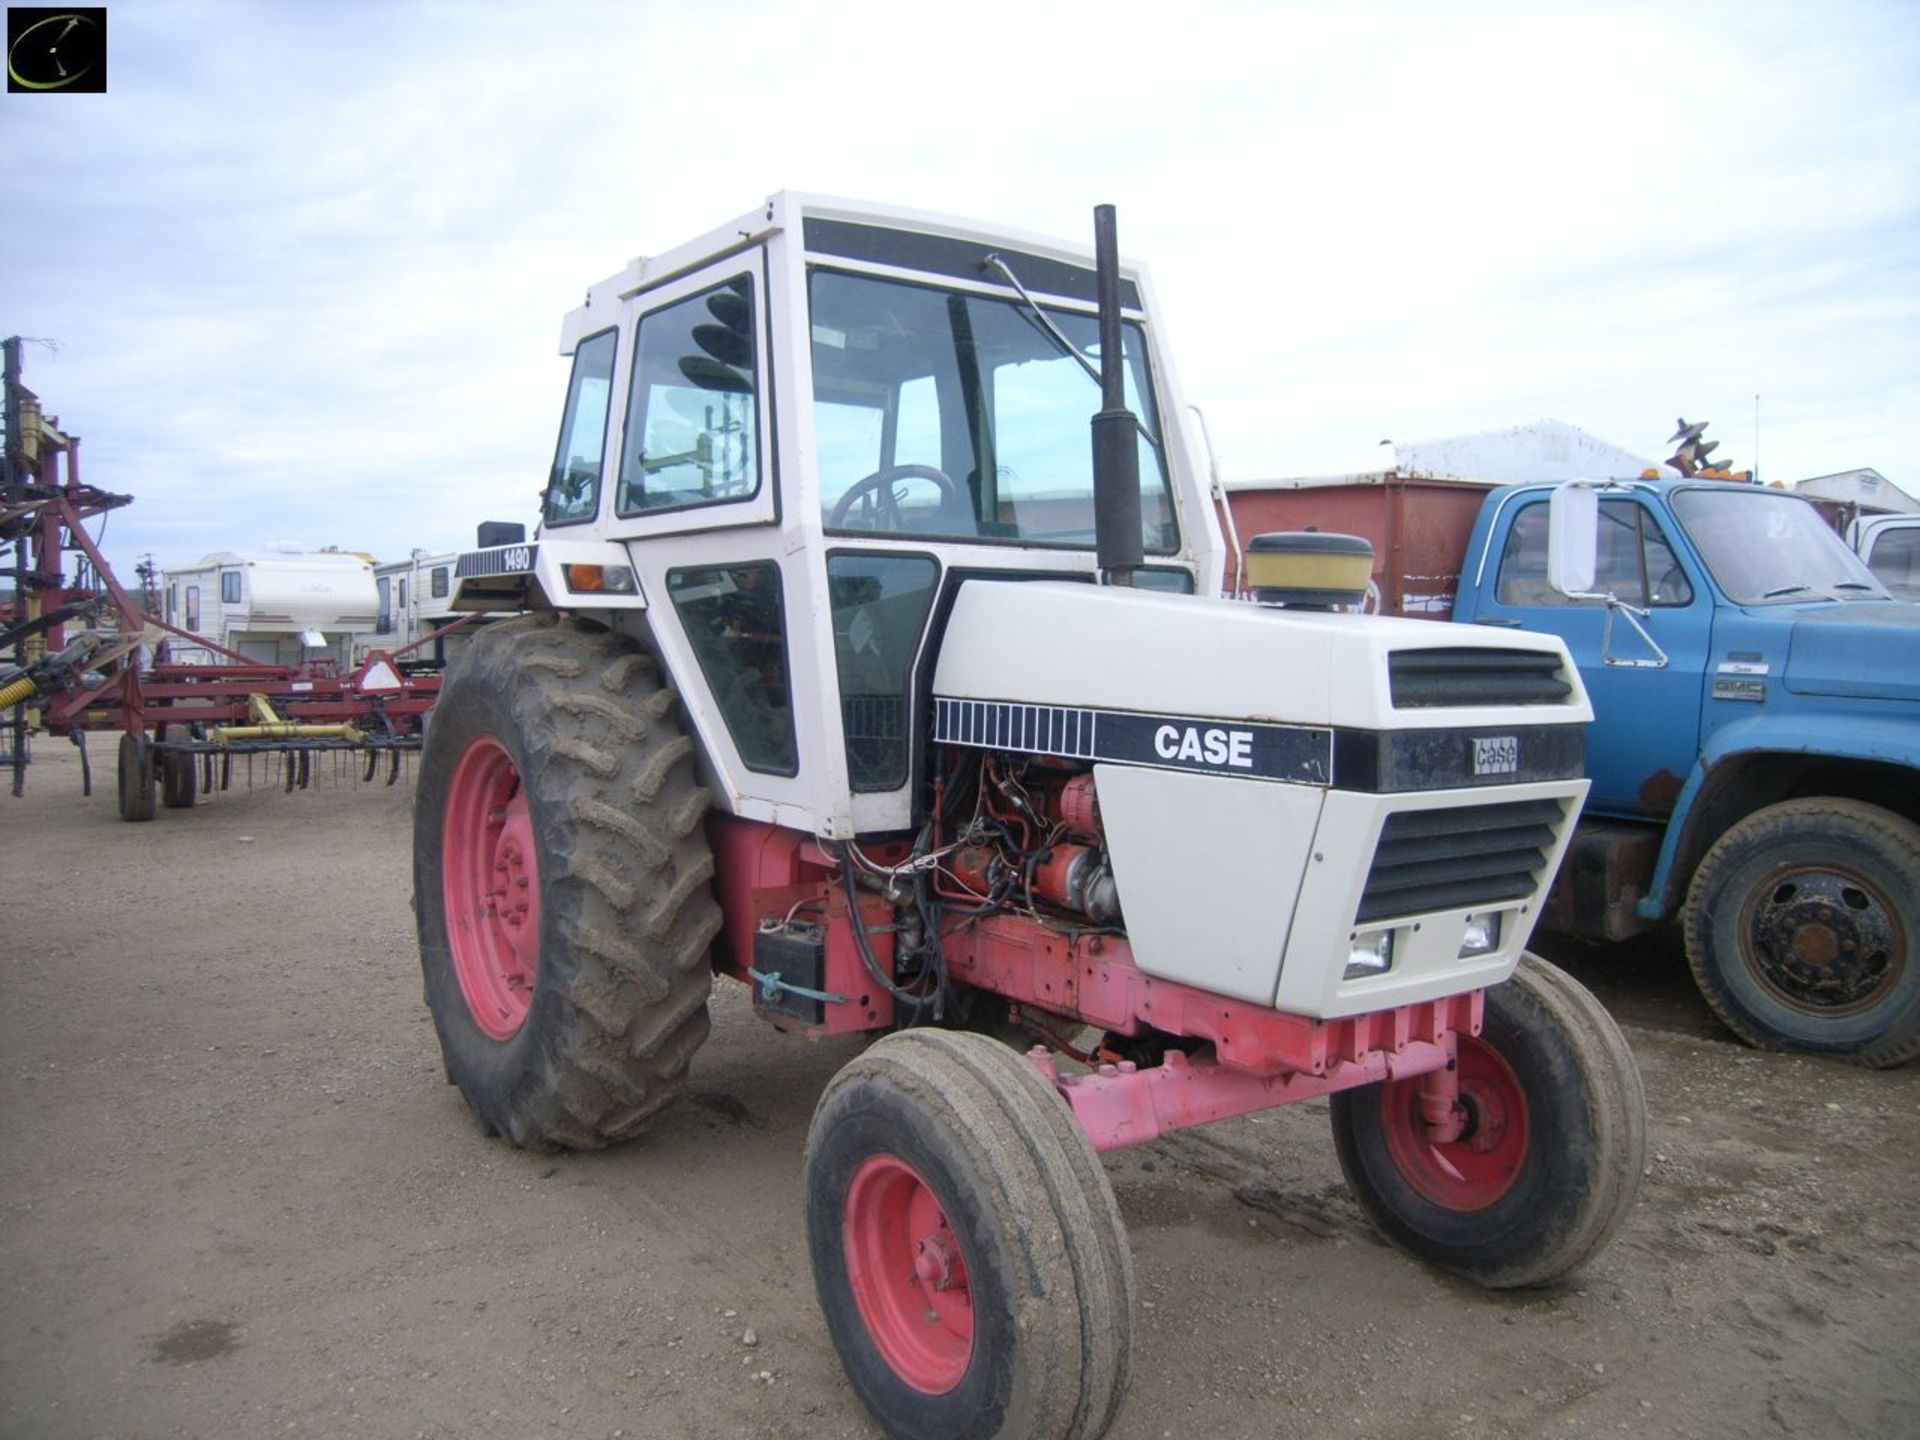 1981 CASE 1490 TRACTOR - Image 2 of 6